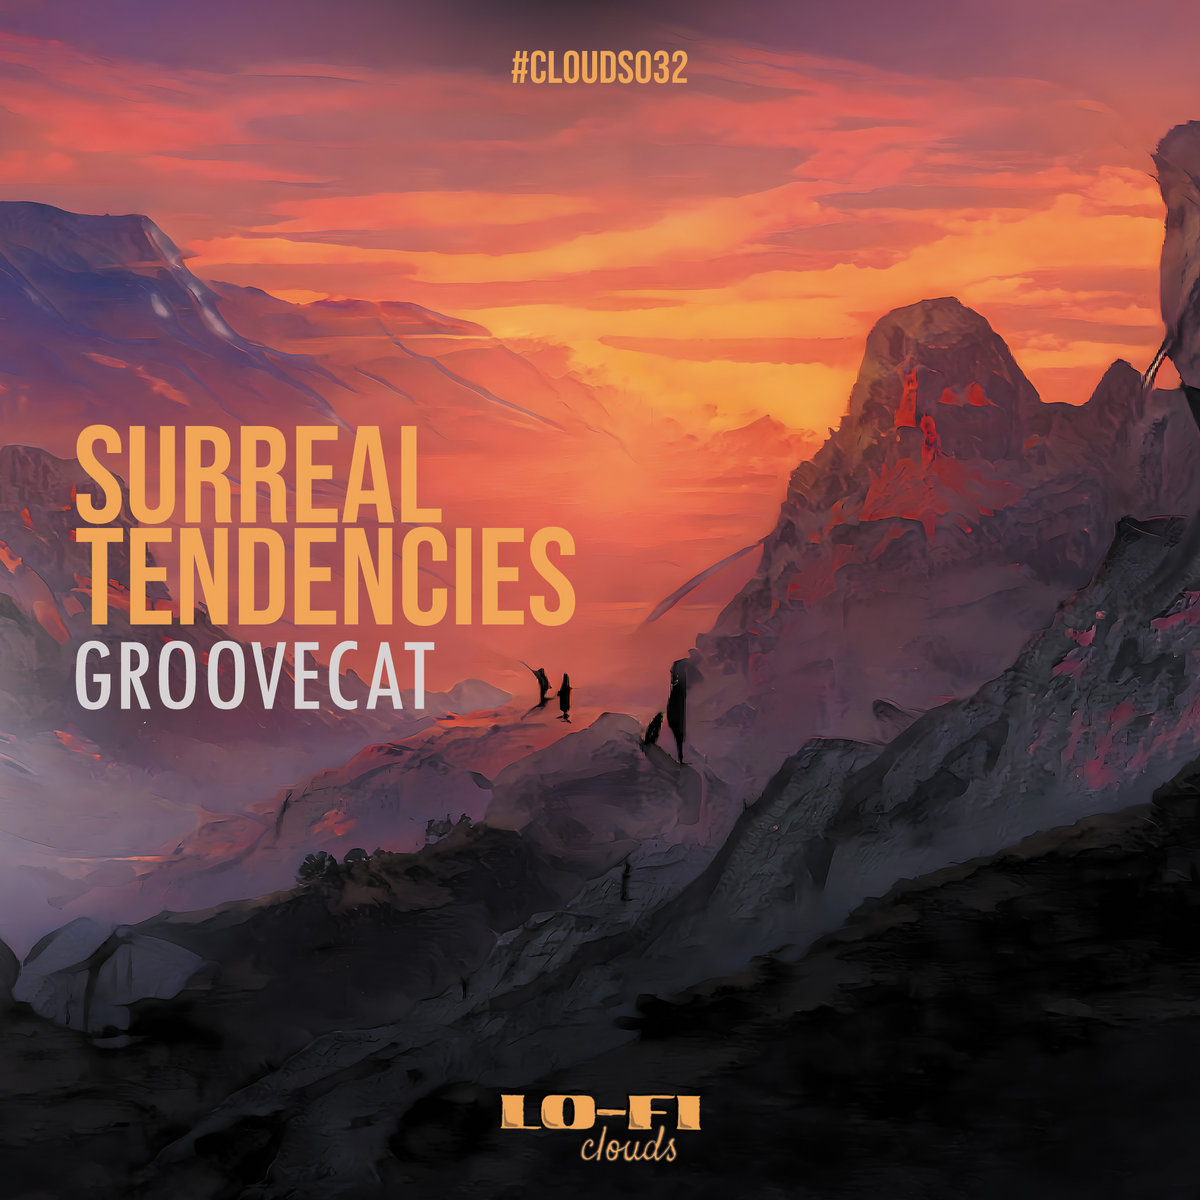 Coverart for Surreal Tendencies - Groovecat - CLOUDS032